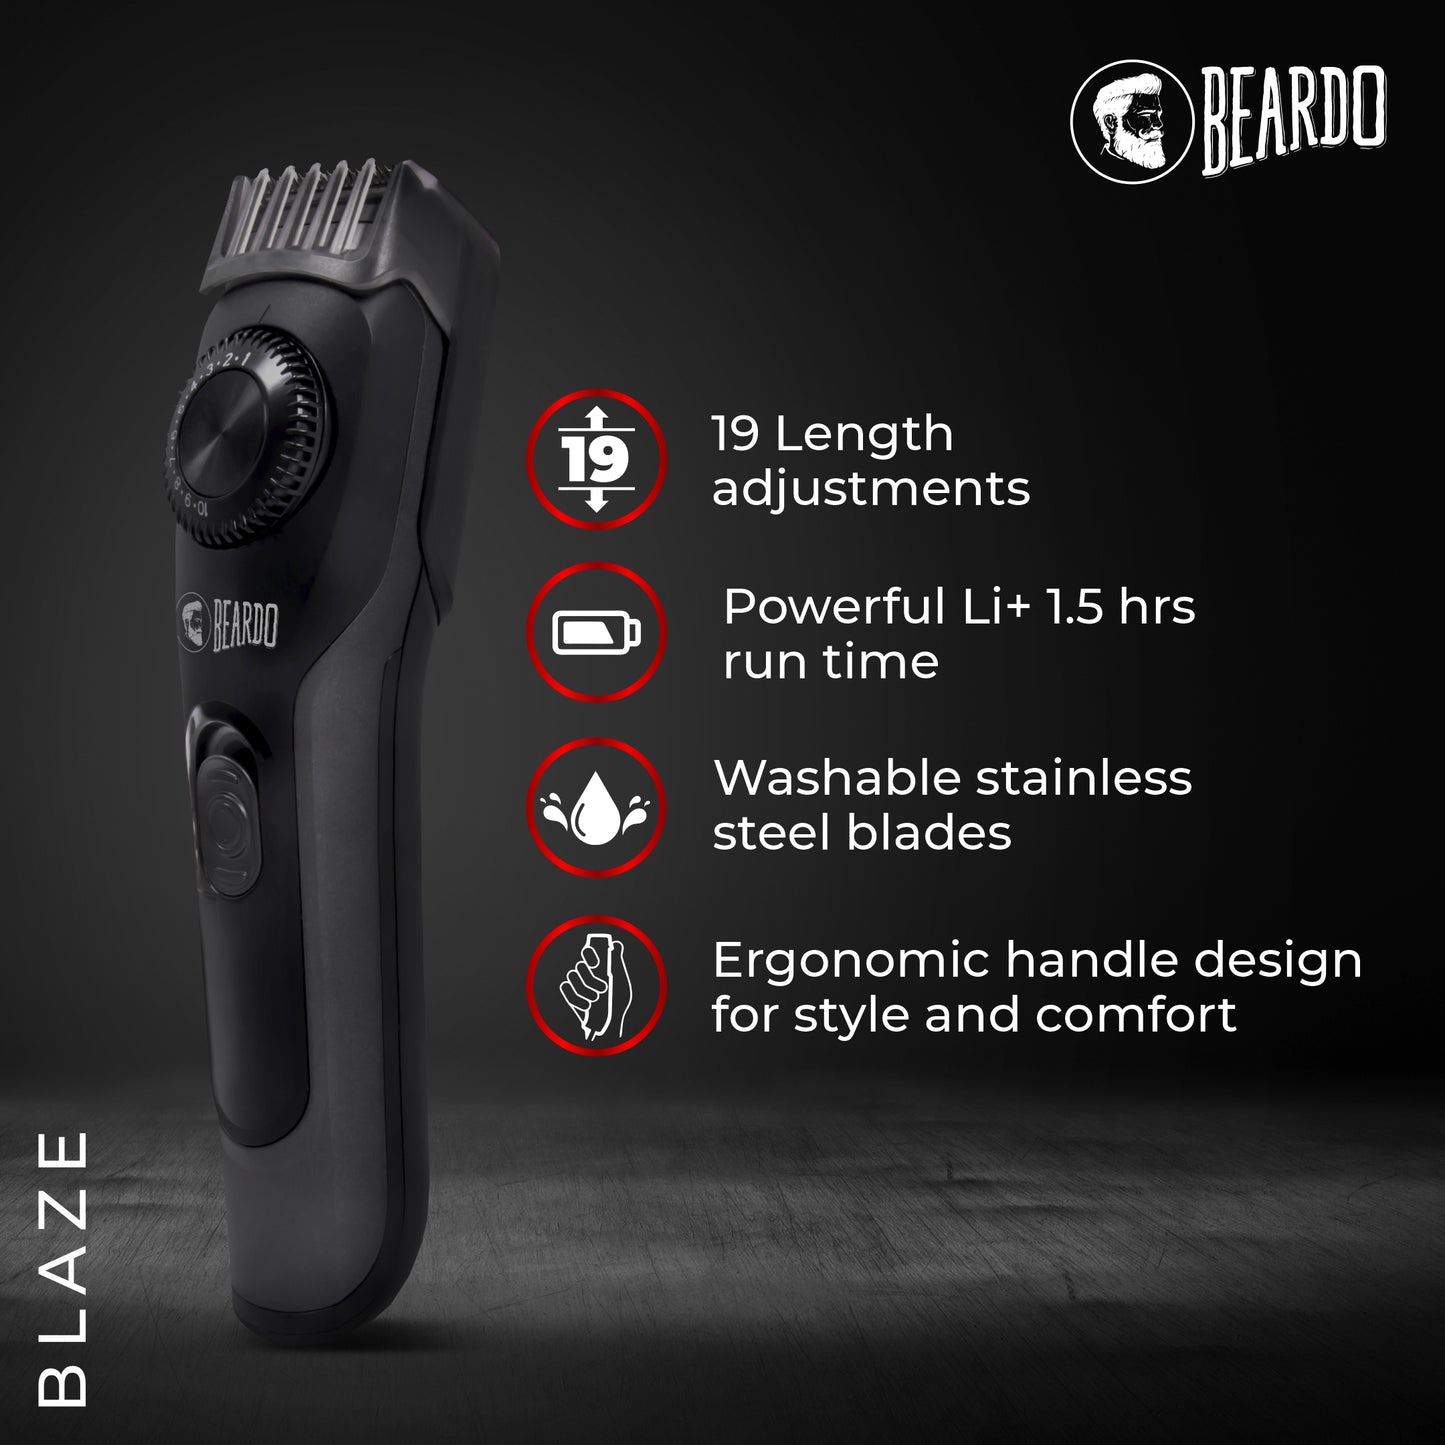 shaving trimmer, trimmer under 1500, best beard trimmer, best trimmer for men, beard trimmer for men, , Is Beardo trimmer washable, Which are the top 5 best trimmer brands in India